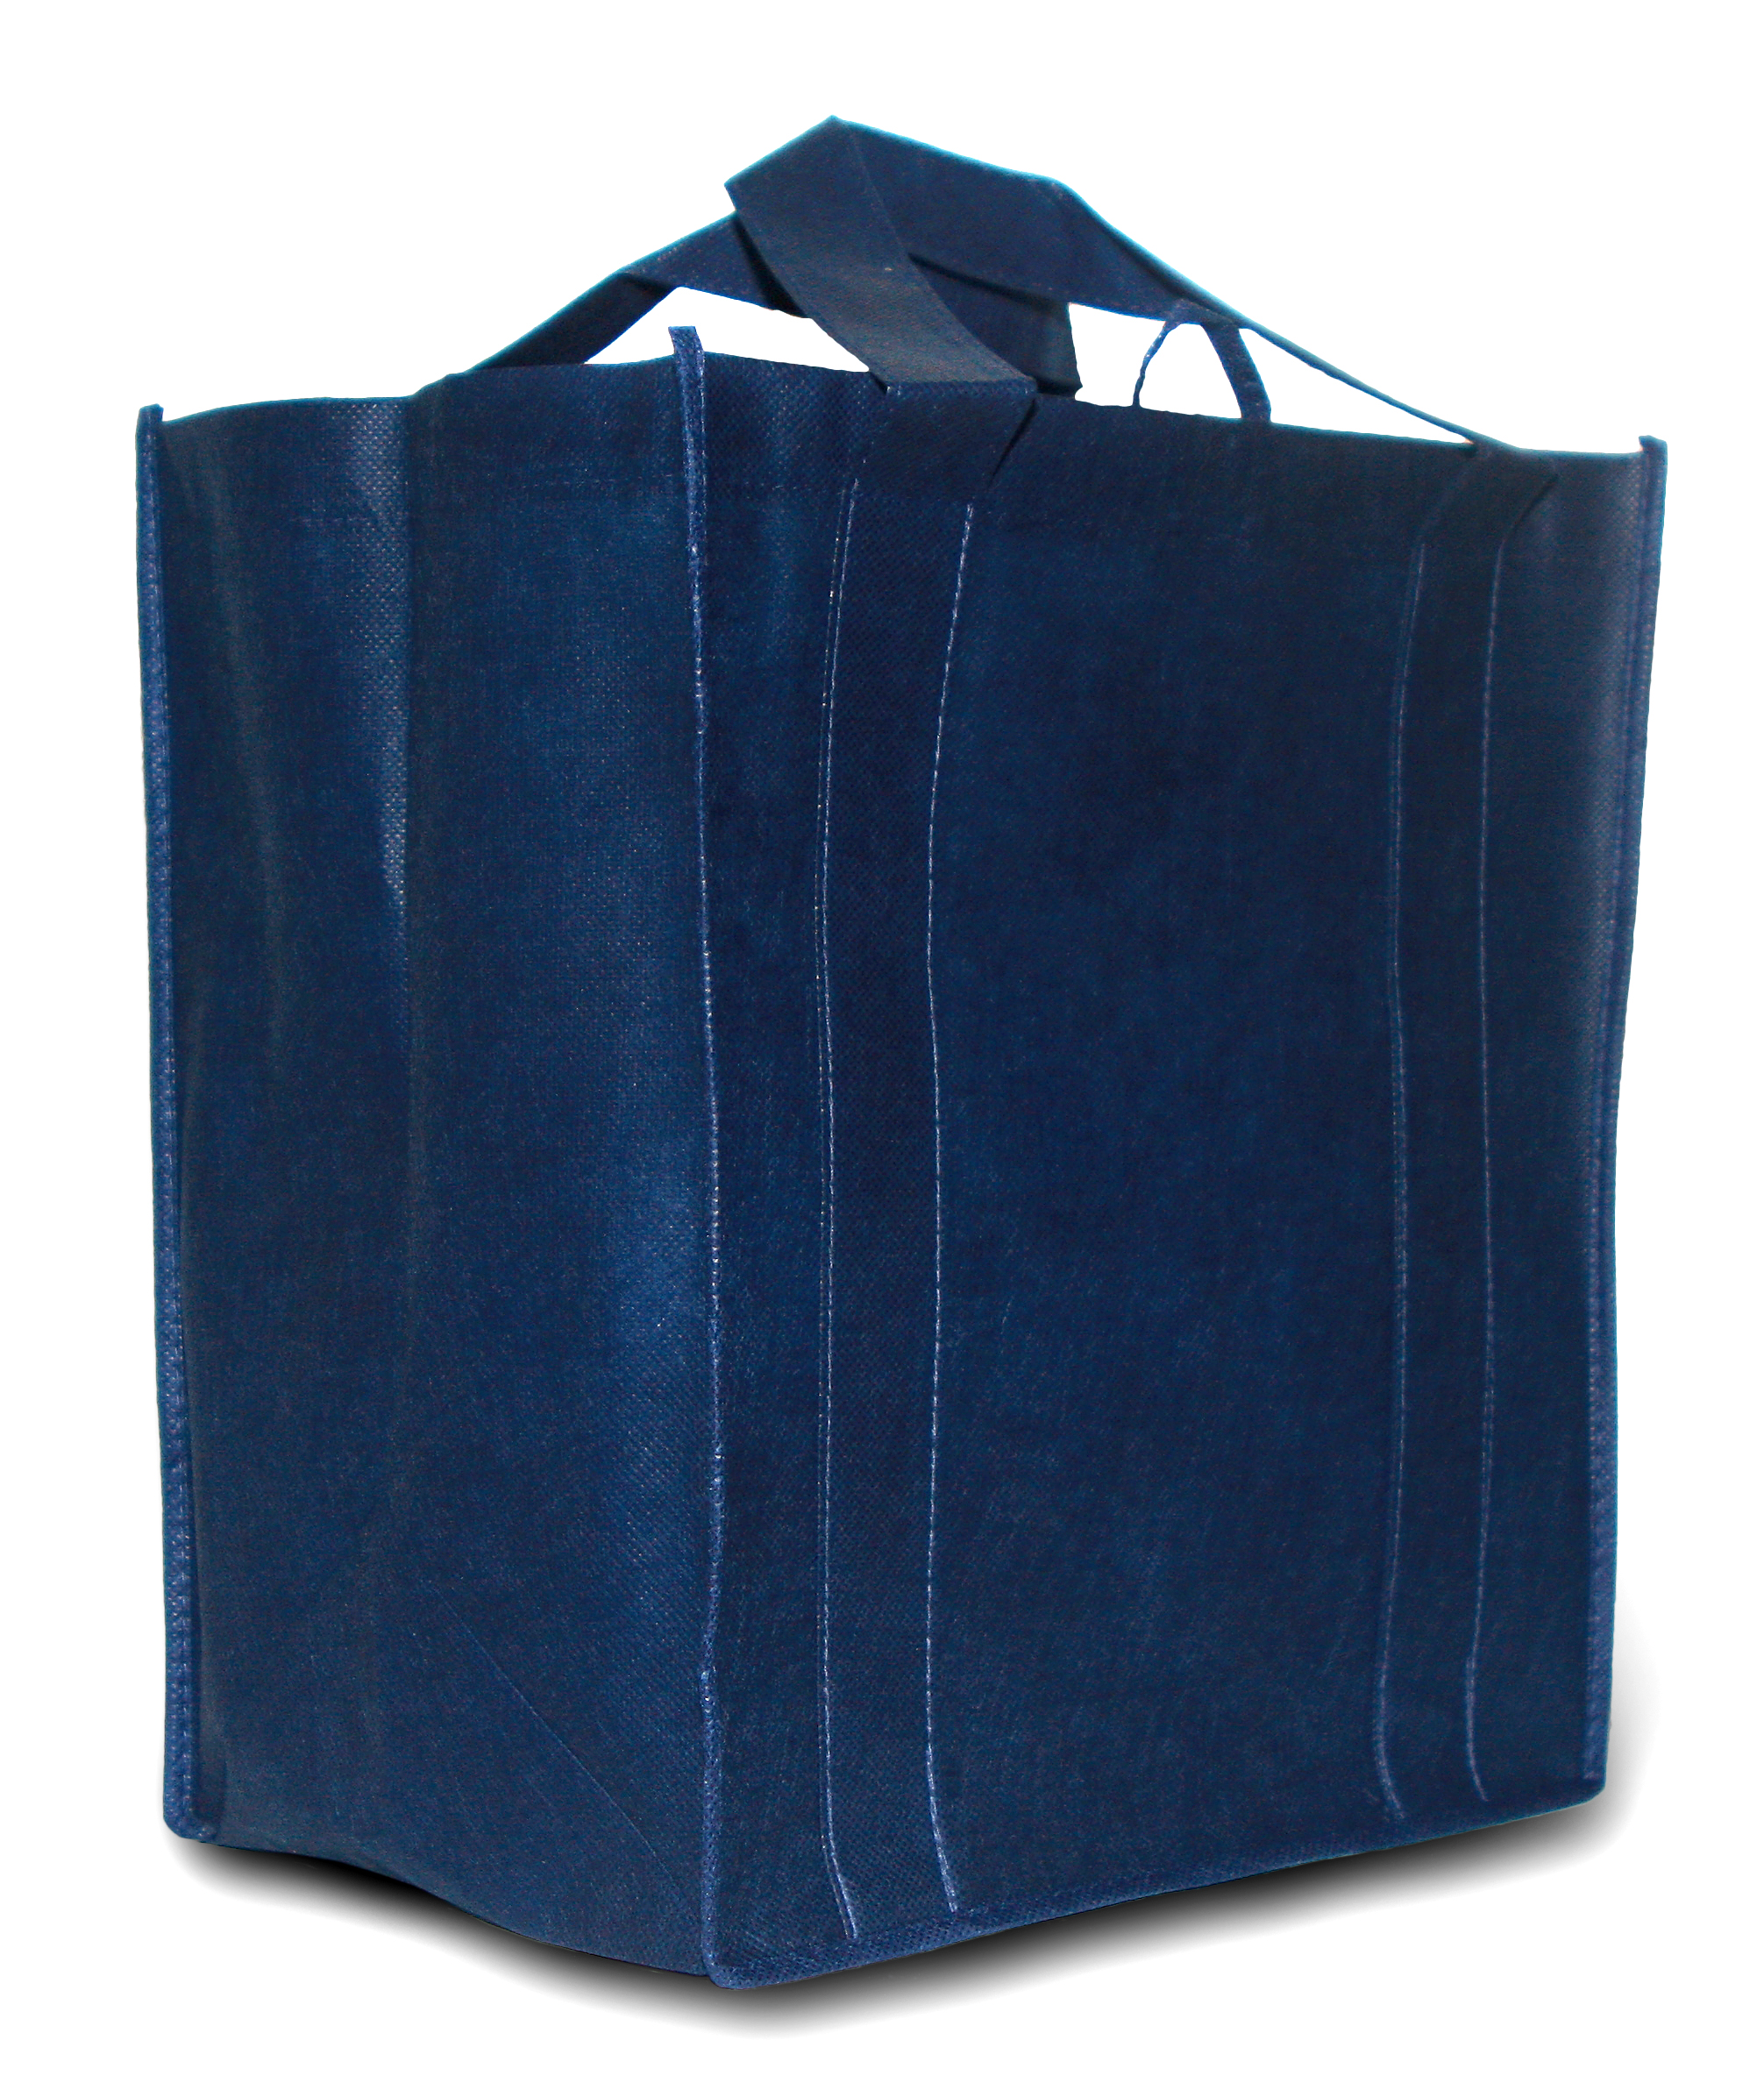 Size 11 x 17 x 21 Shopping Gift Boutique Supermarket Cash N Carry Market Stall UKPS 200X Blue Plastic Polythene Vest Style Carrier Bags 